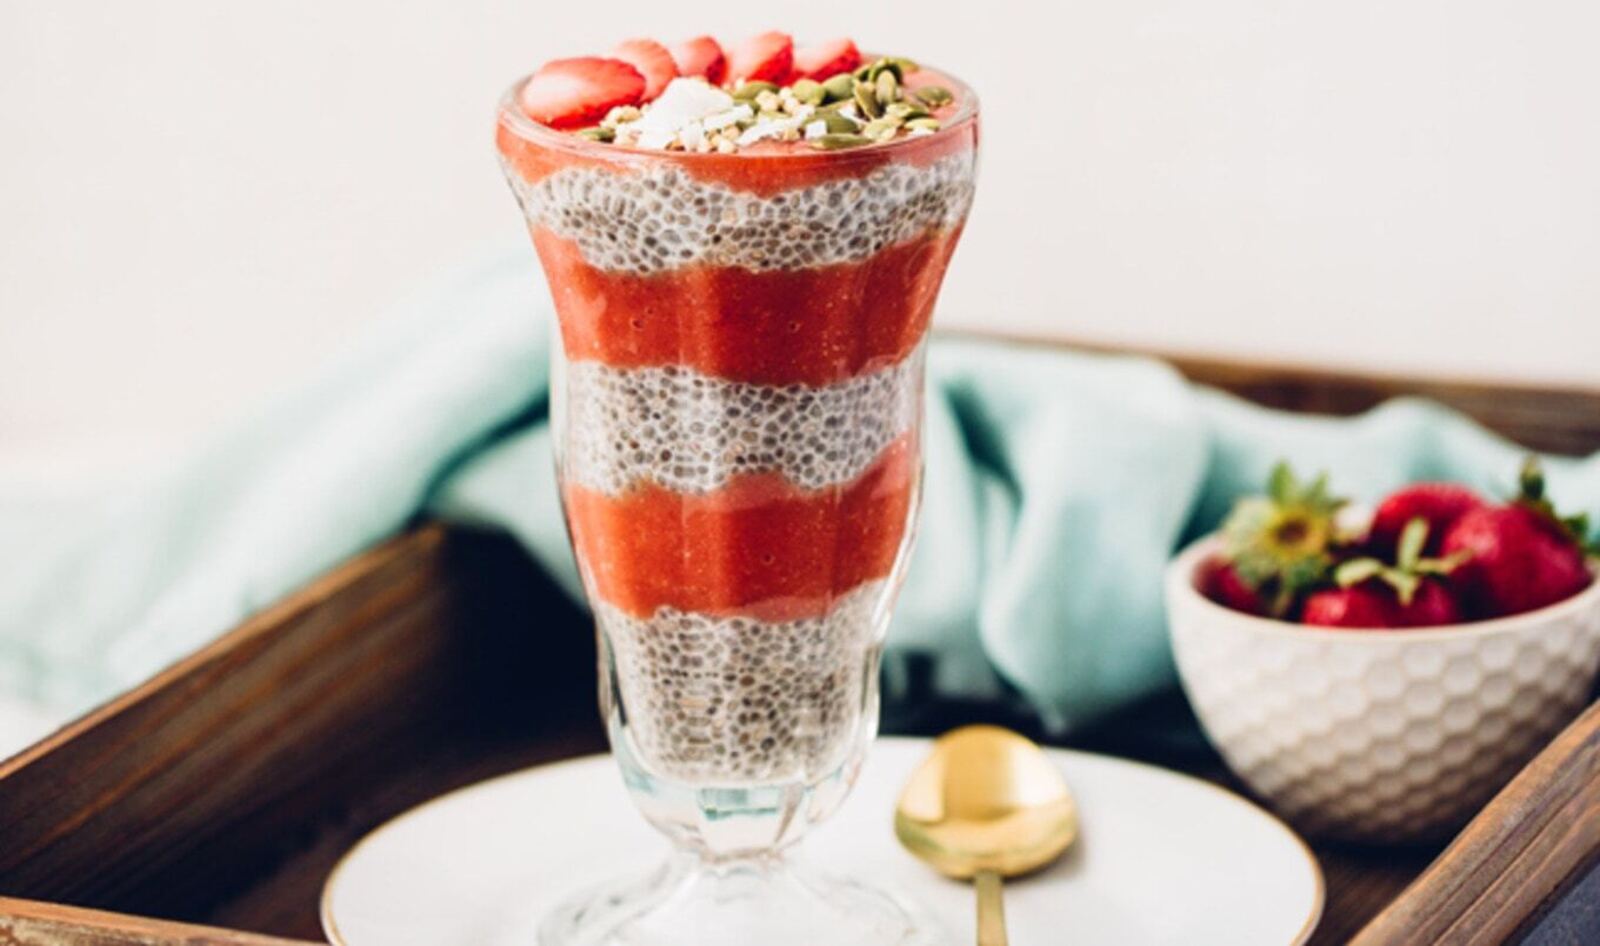 These Chia Seed Benefits and Uses Will Make You Fall in Love With the Aztec Super Seed